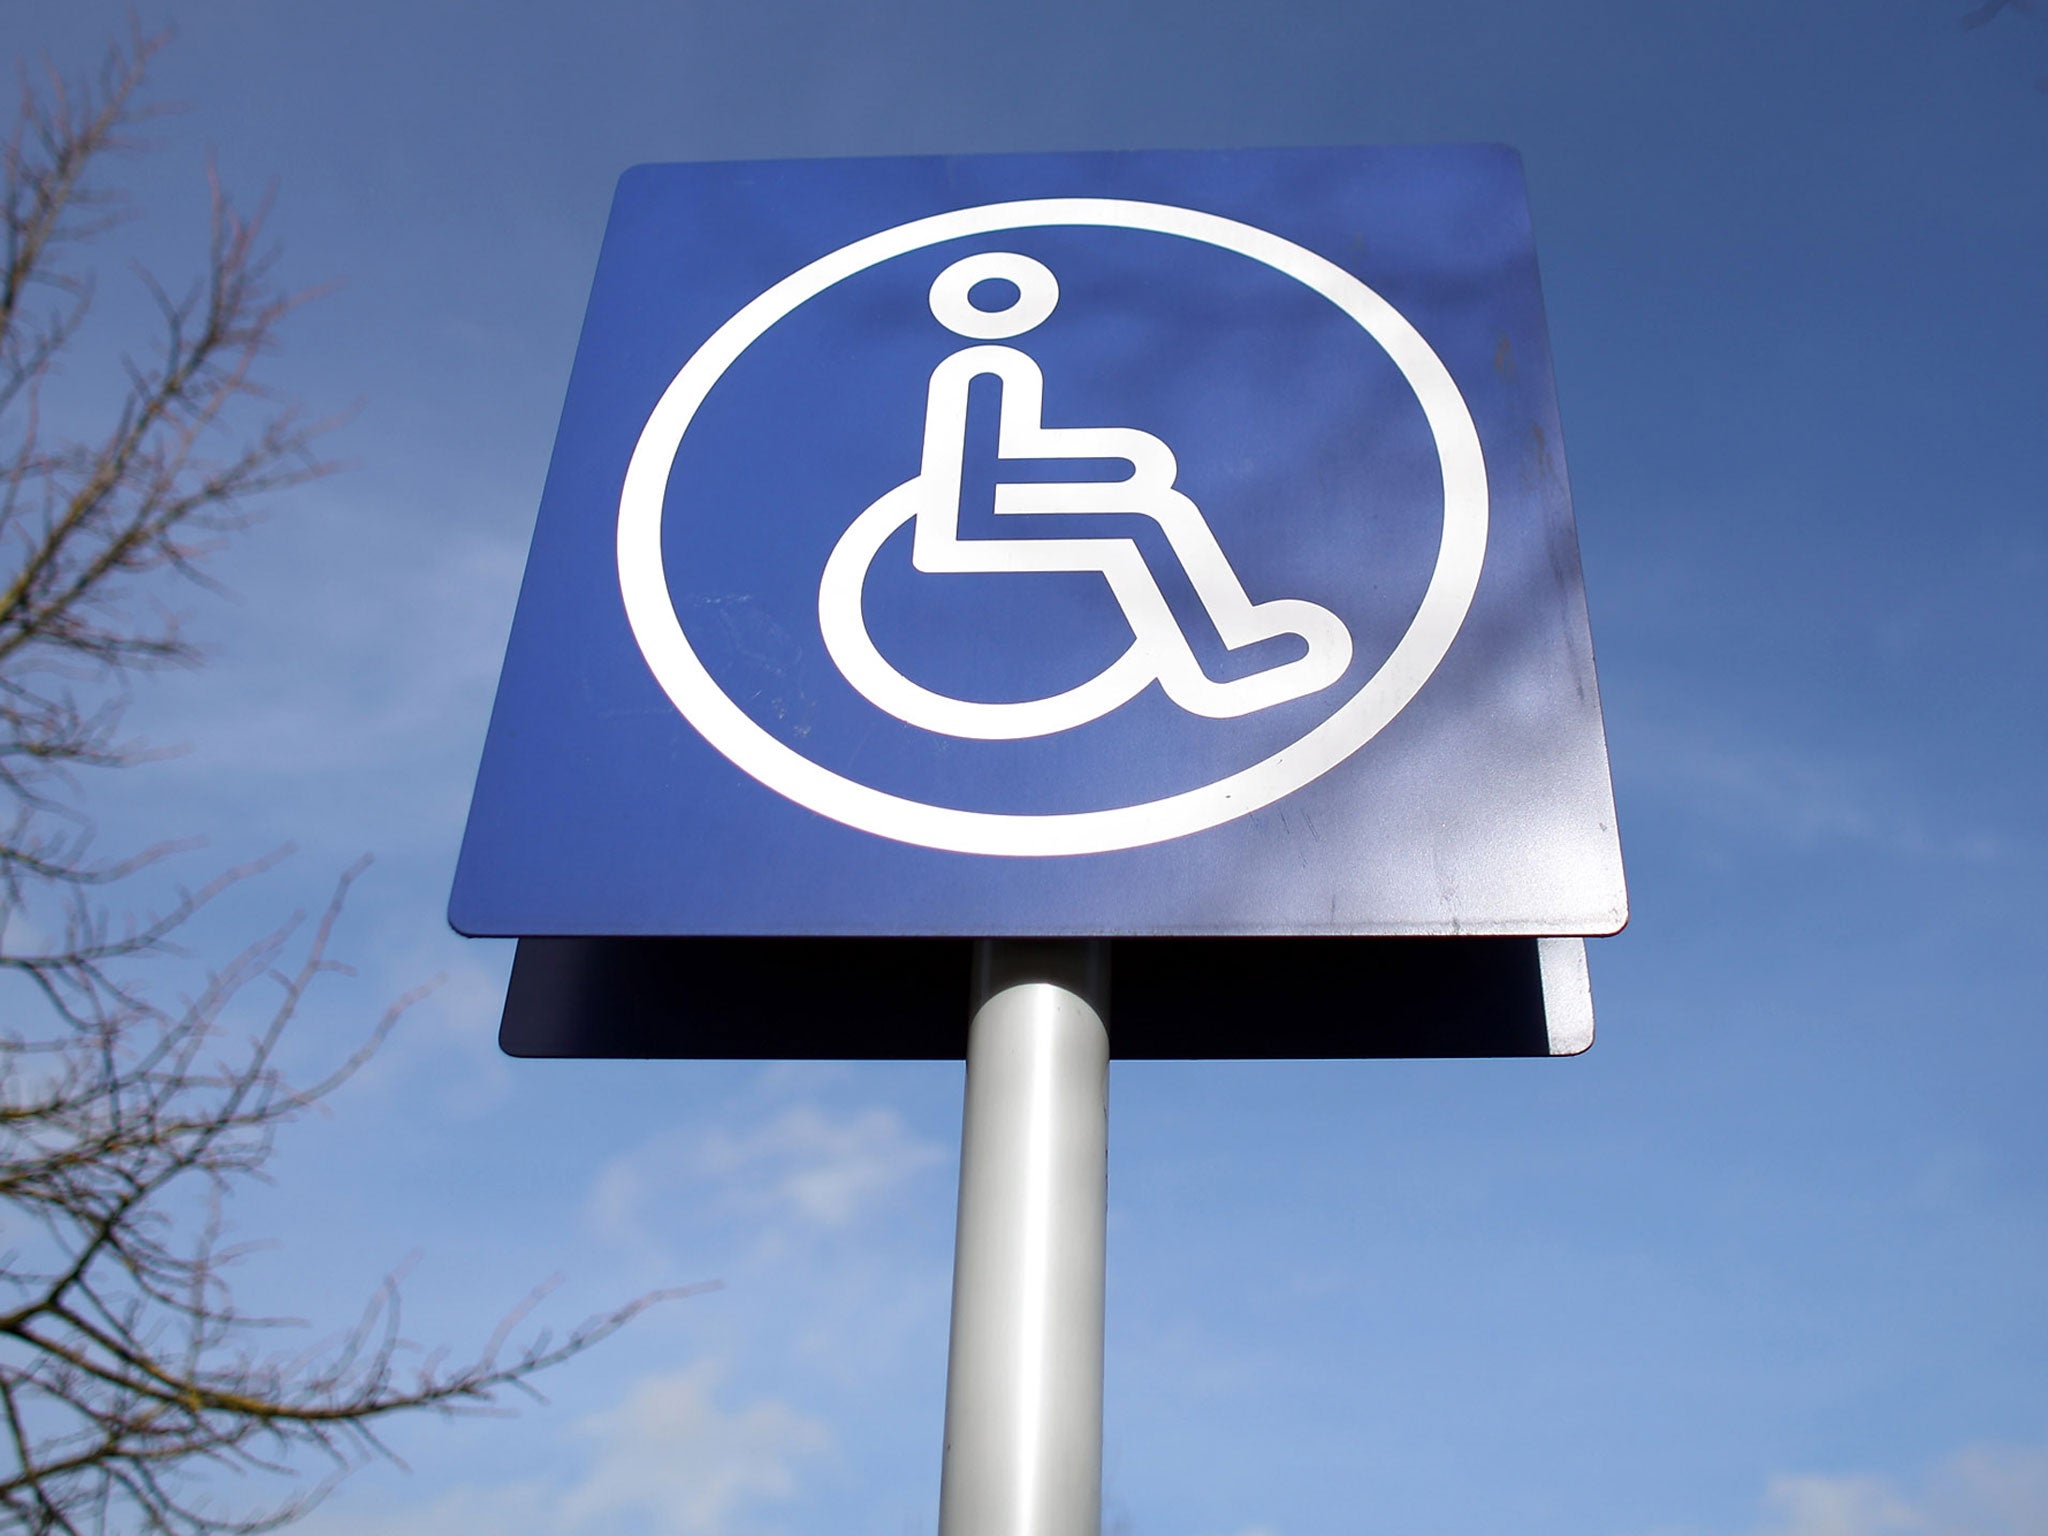  A sign is displayed above a disabled car parking bay on February 16, 2011 in Bath, England. The government is currently considering a range of measures after it was revealed that the system - which allows badge holders free parking in many pay-and-displa